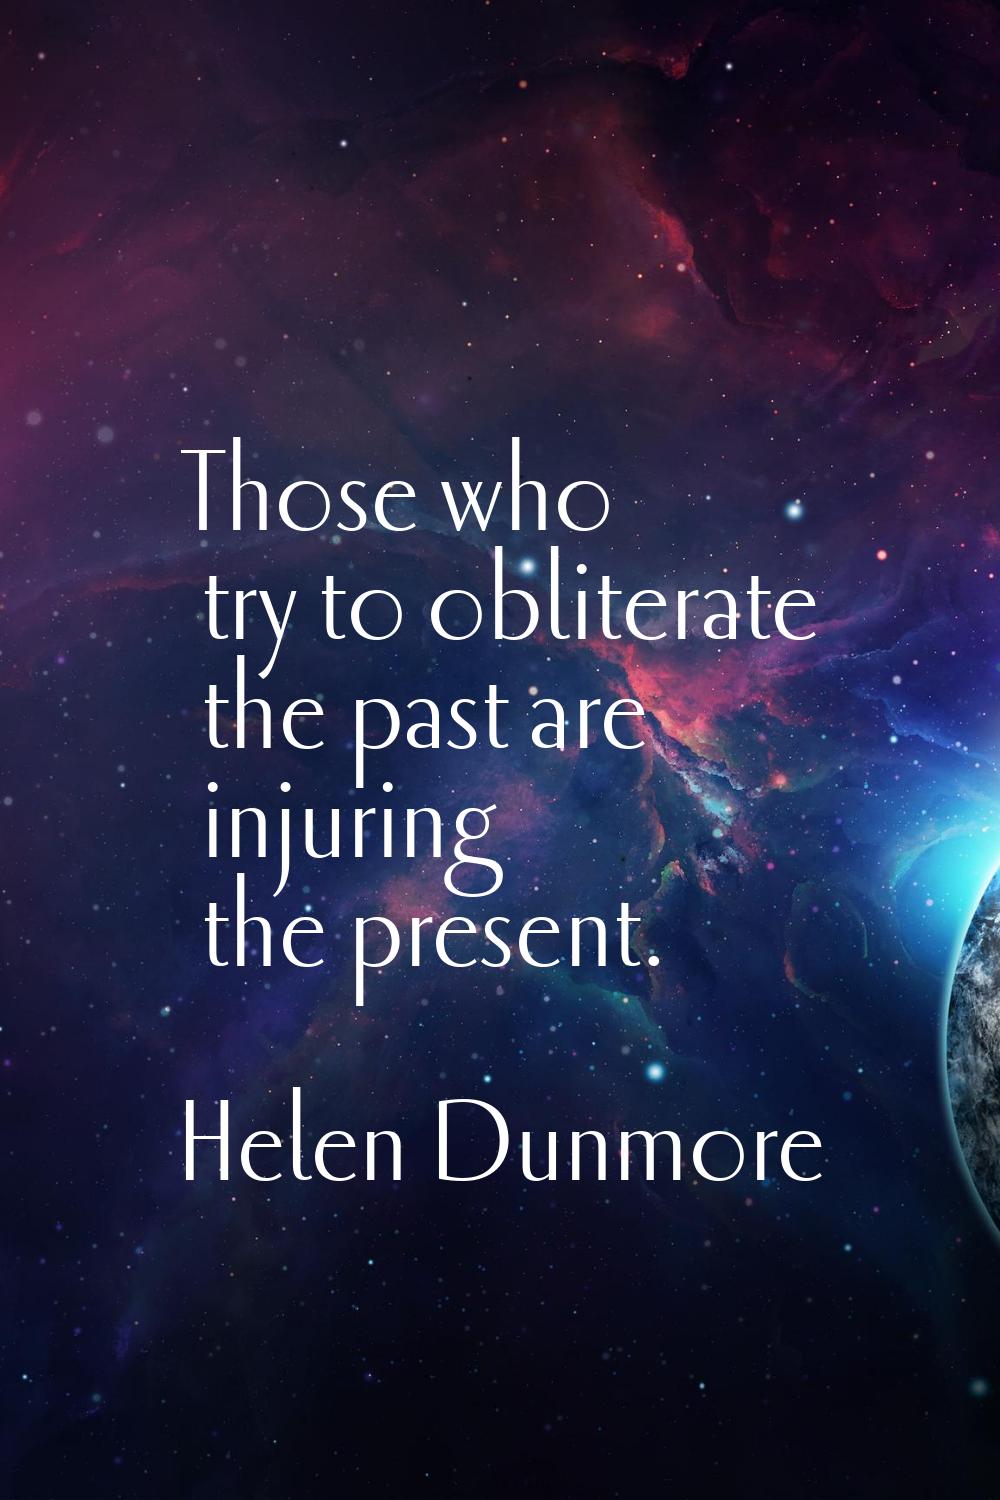 Those who try to obliterate the past are injuring the present.